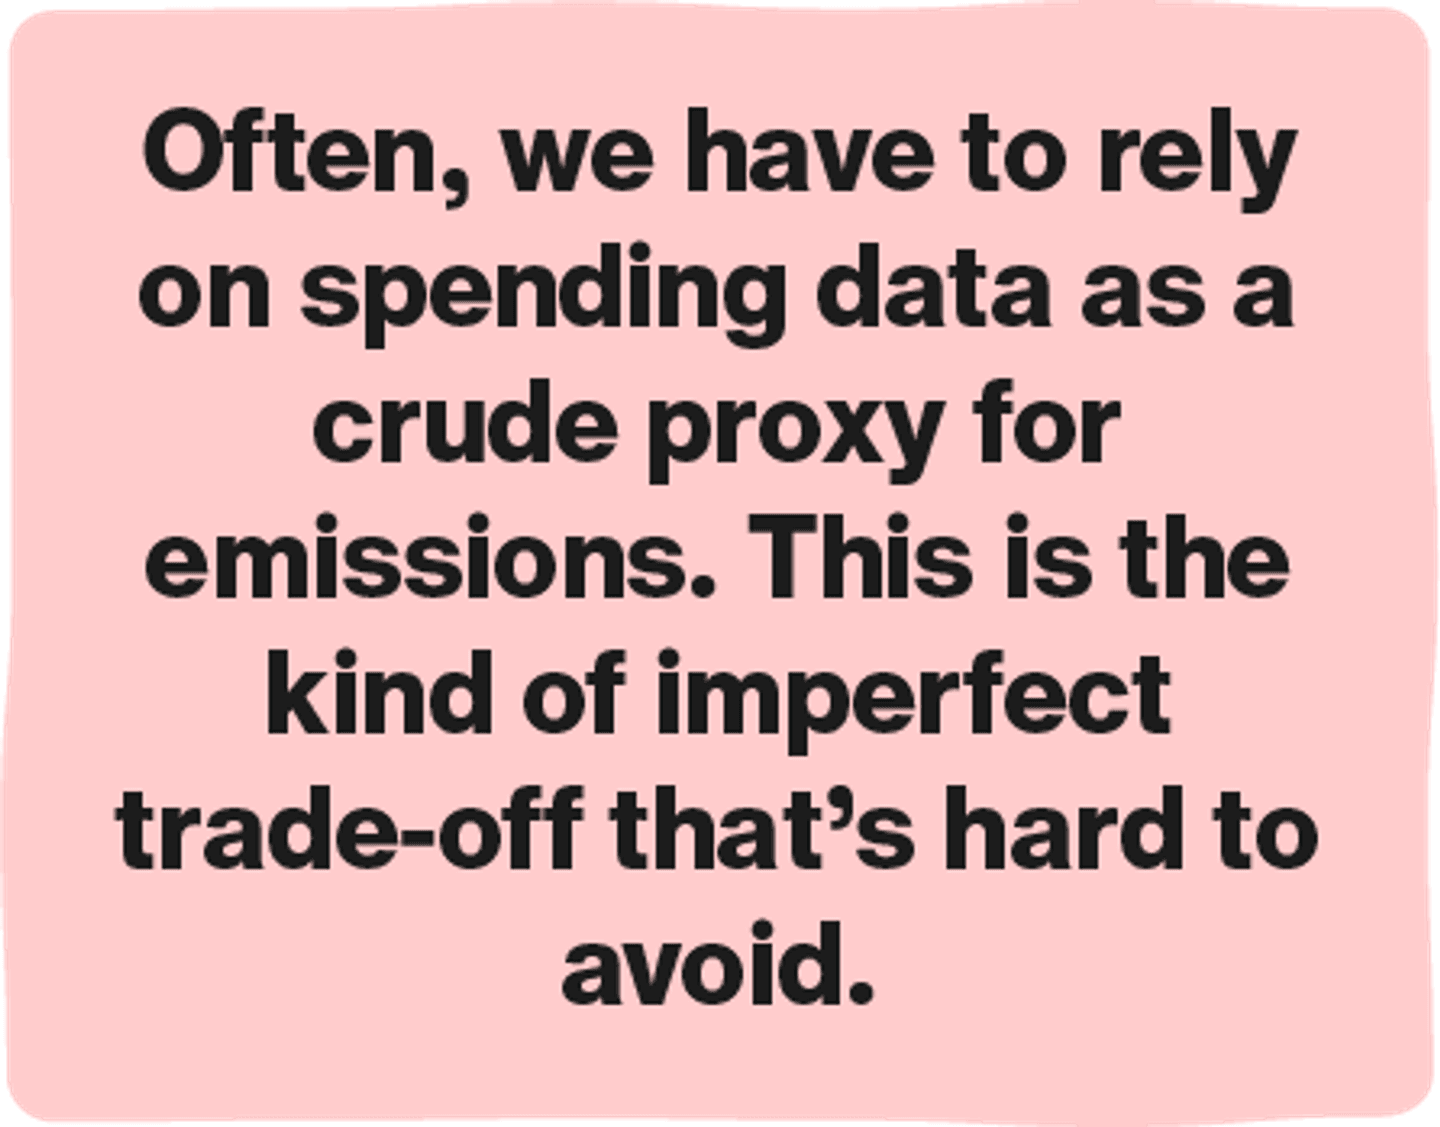 Often, we have to rely on spending data as a crude proxy for emissions. This is the kind of imperfect trade-off that's hard to avoid.